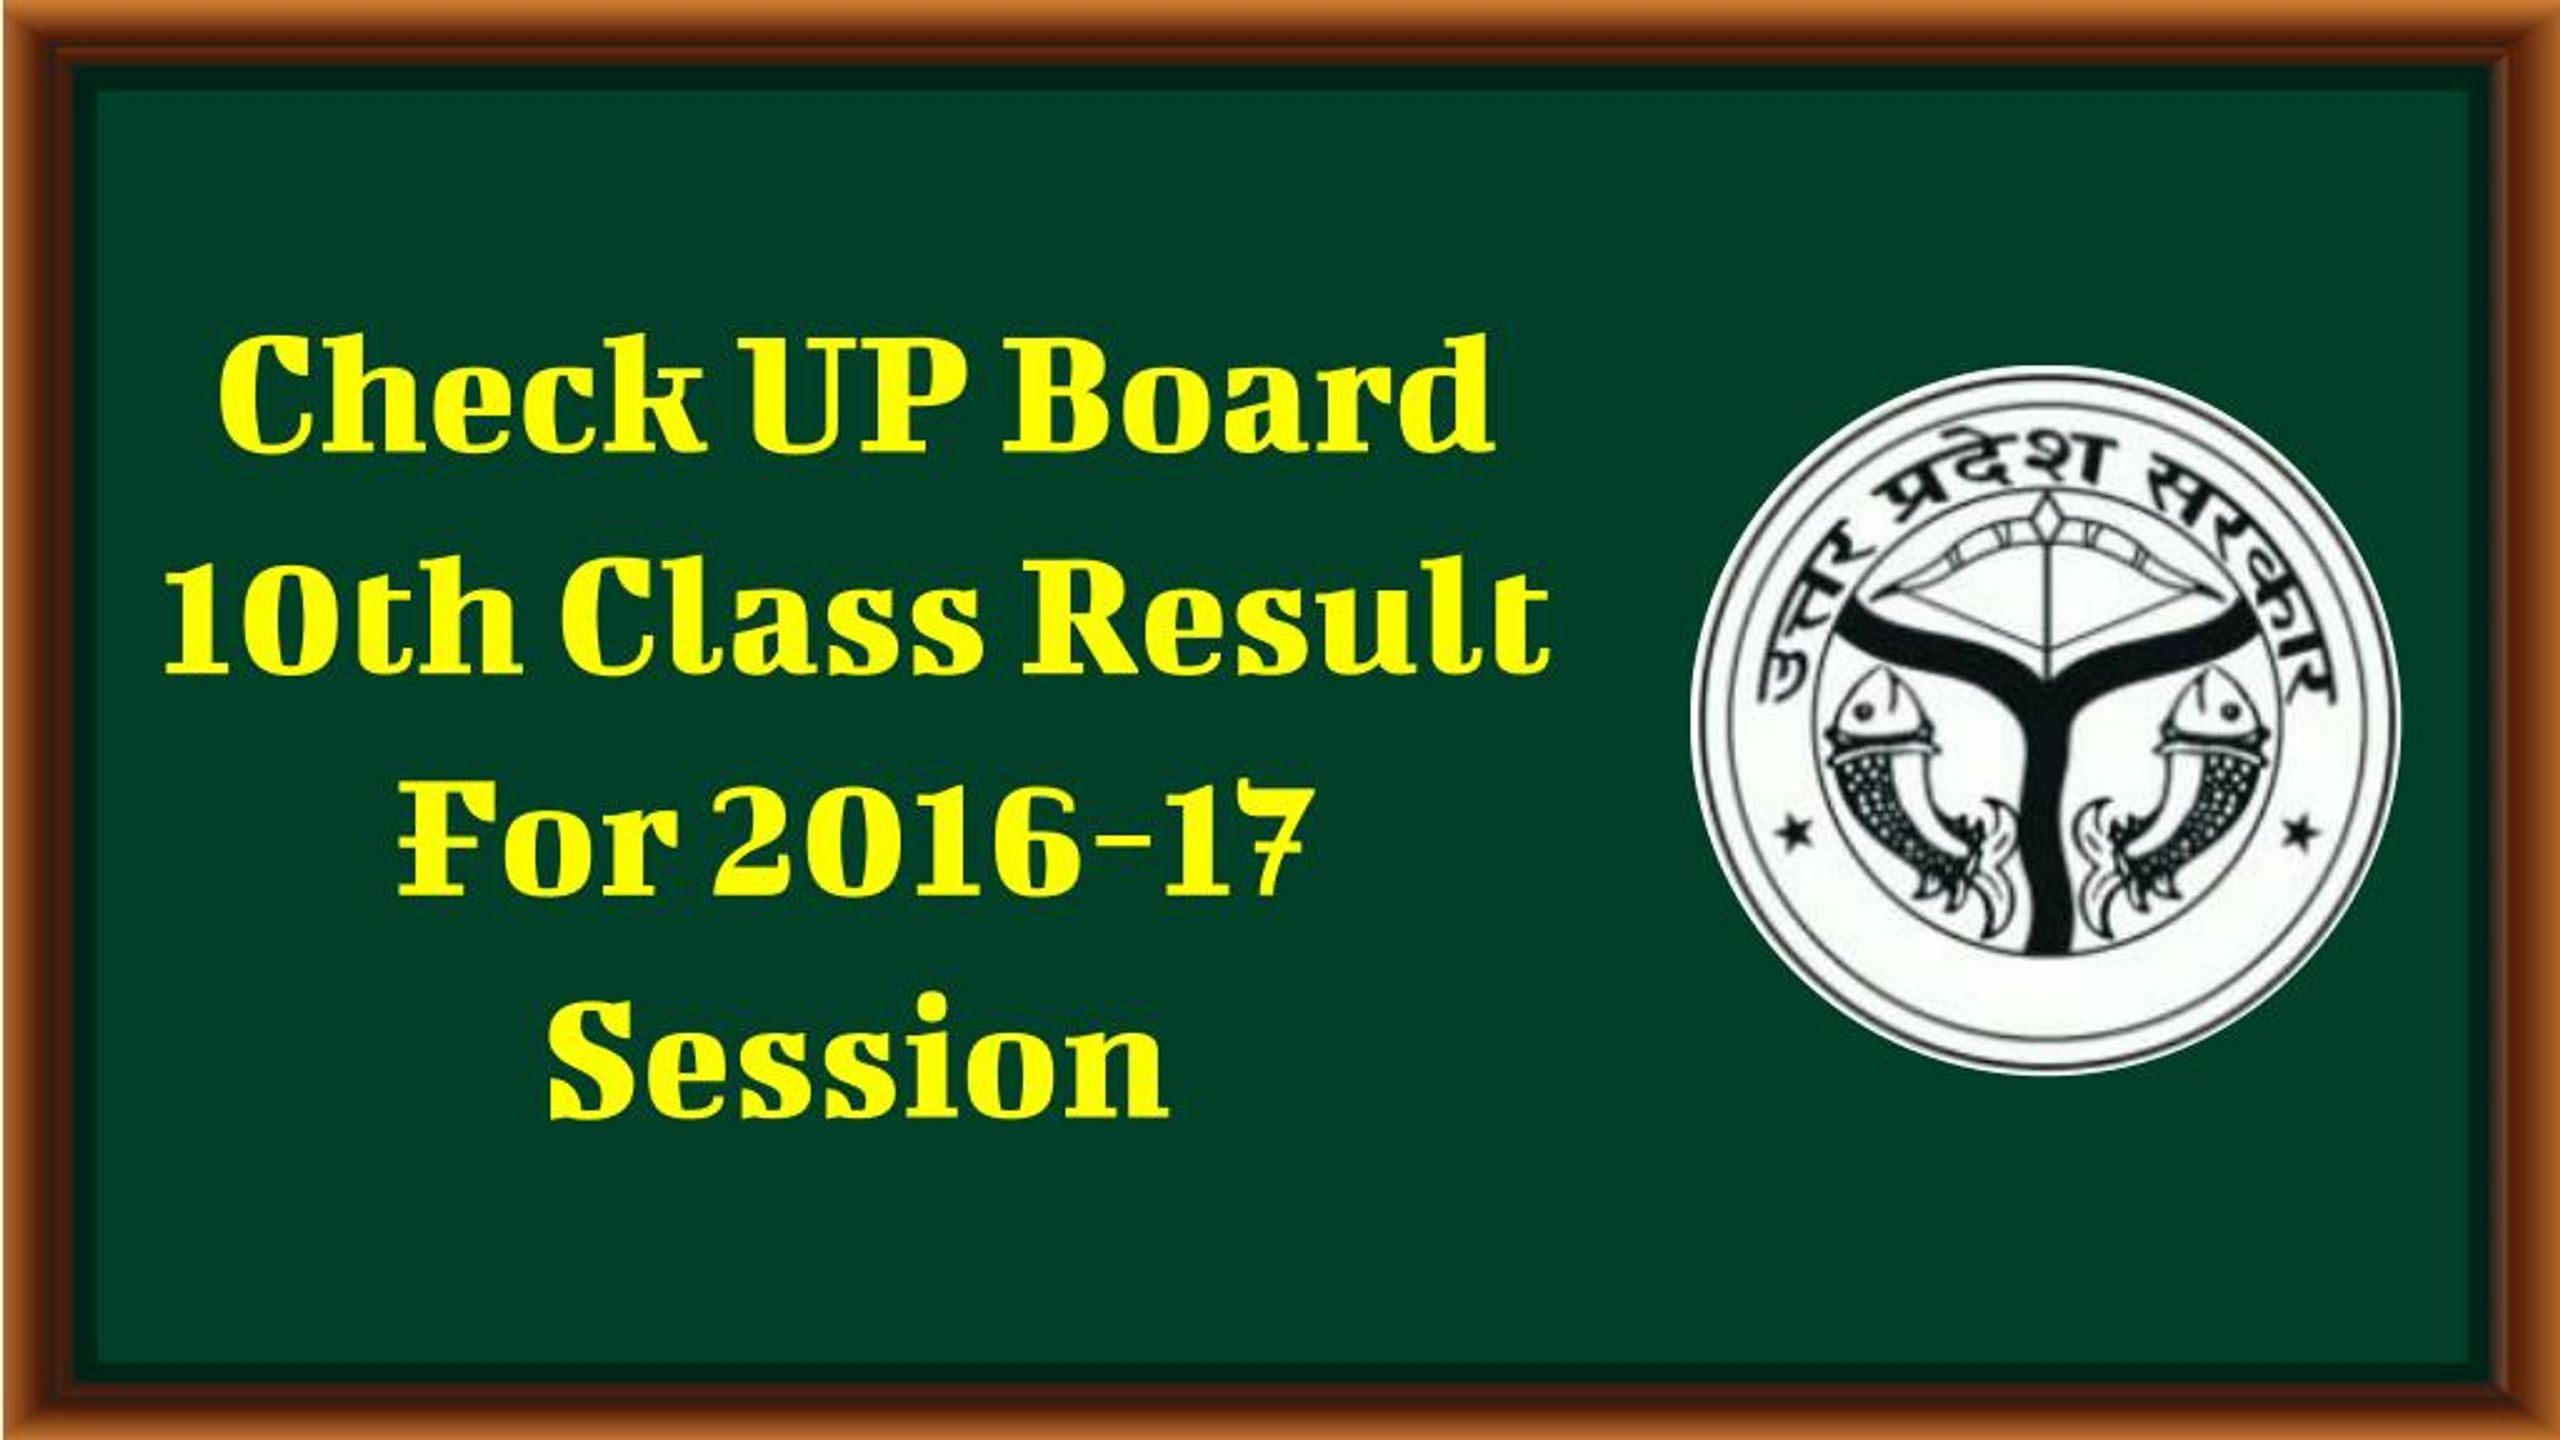 Ppt Check Up Board 10th Class Result For 16 17 Session Powerpoint Presentation Id